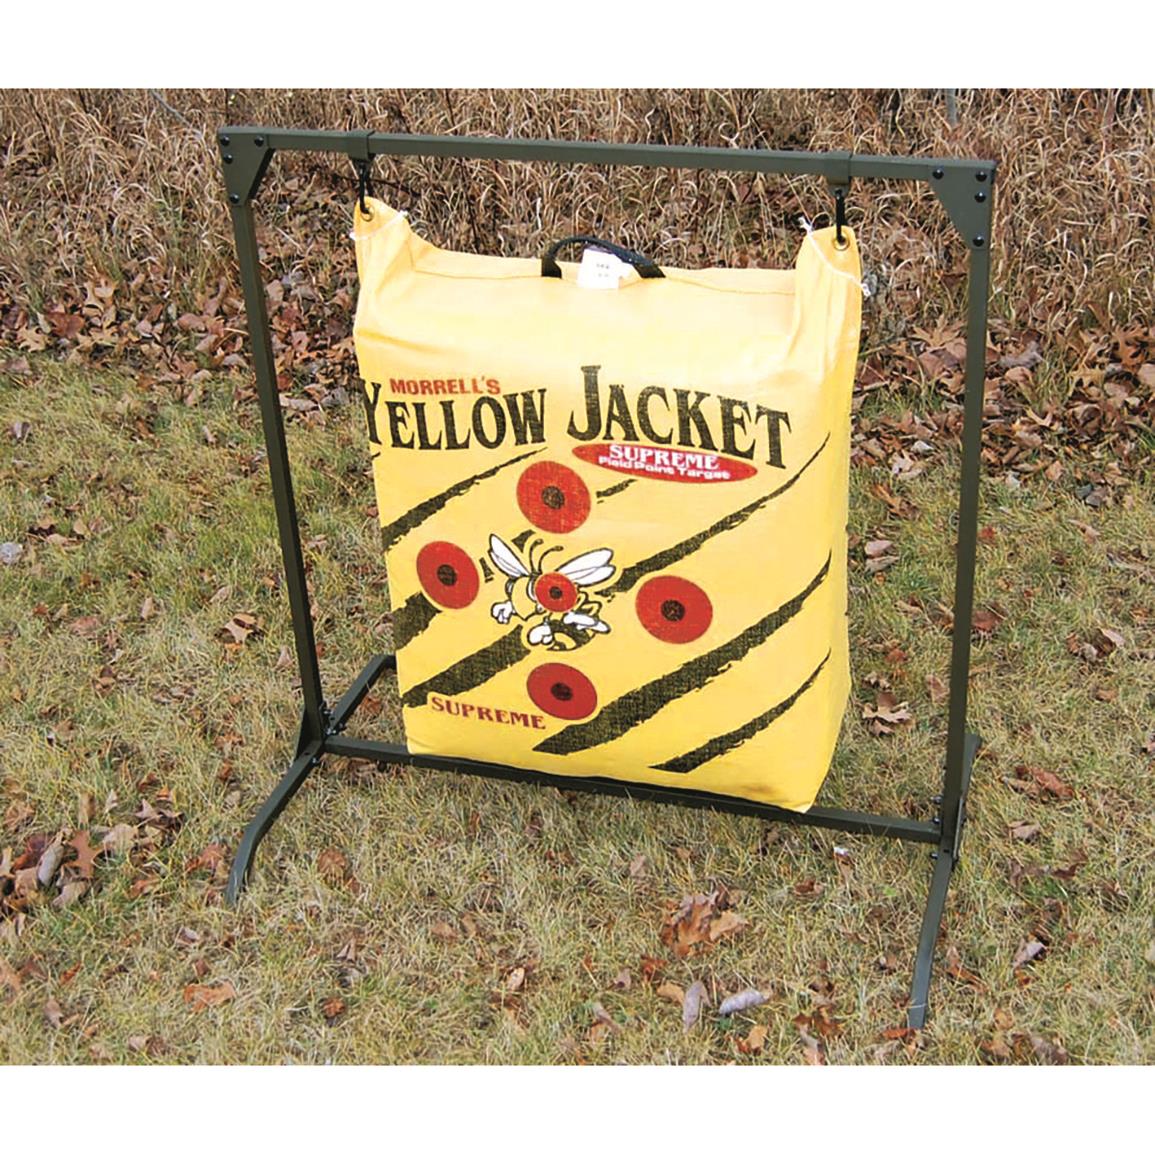 HME Archery Bag Target Stand